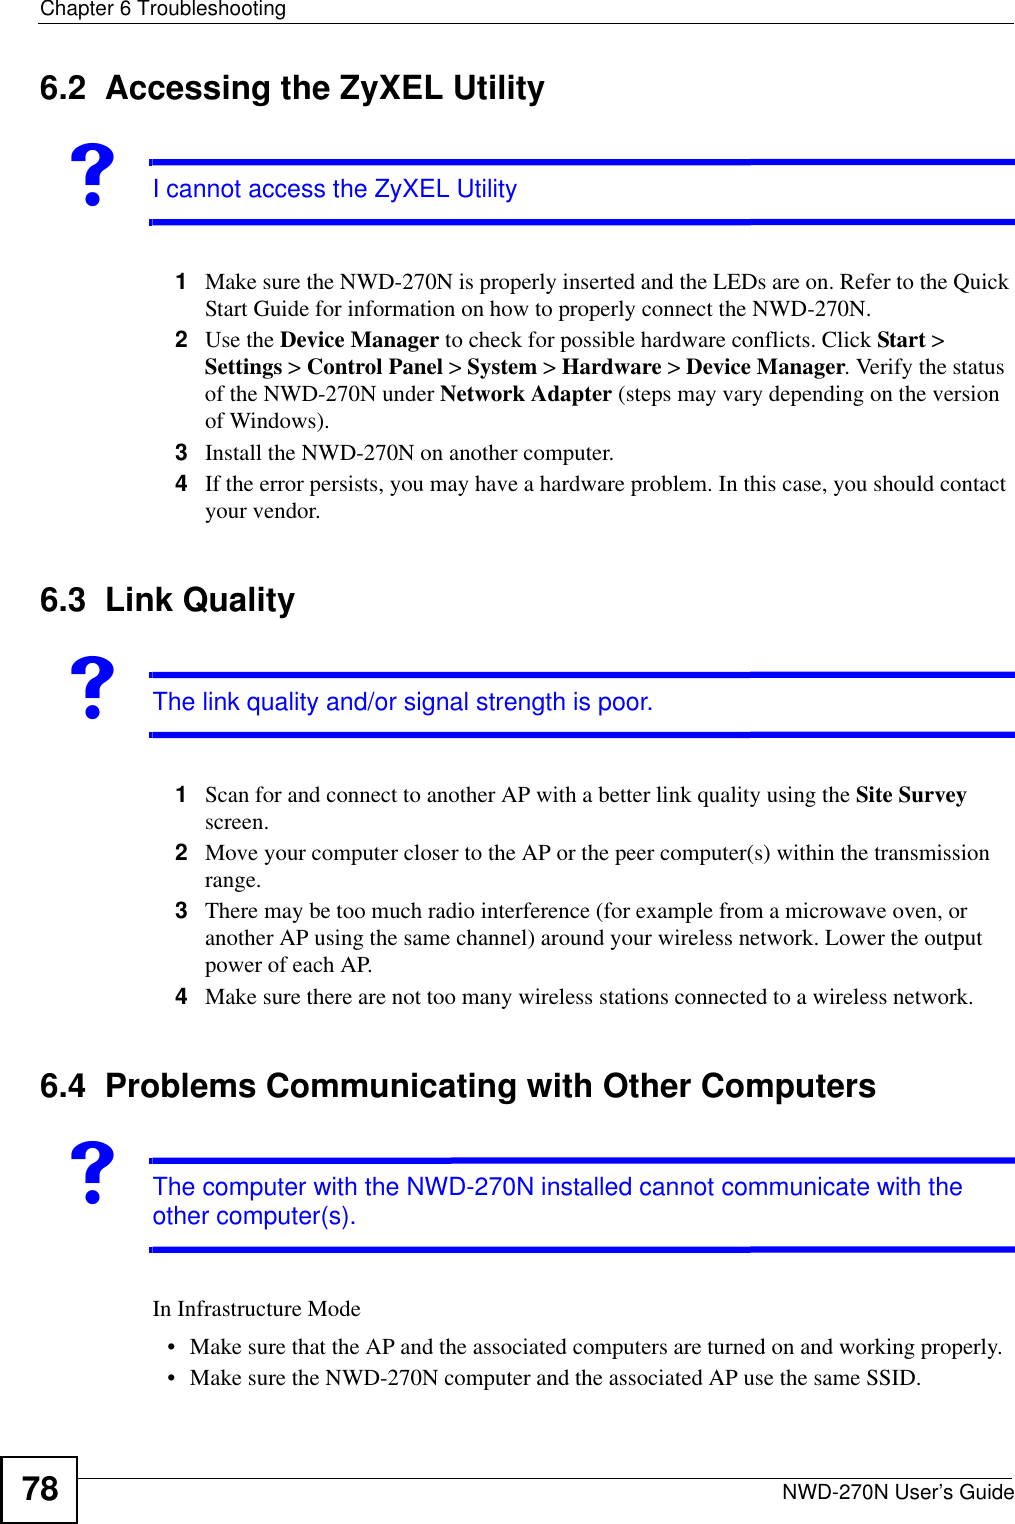 Chapter 6 TroubleshootingNWD-270N User’s Guide786.2  Accessing the ZyXEL UtilityVI cannot access the ZyXEL Utility1Make sure the NWD-270N is properly inserted and the LEDs are on. Refer to the Quick Start Guide for information on how to properly connect the NWD-270N.2Use the Device Manager to check for possible hardware conflicts. Click Start &gt; Settings &gt; Control Panel &gt; System &gt; Hardware &gt; Device Manager. Verify the status of the NWD-270N under Network Adapter (steps may vary depending on the version of Windows). 3Install the NWD-270N on another computer.4If the error persists, you may have a hardware problem. In this case, you should contact your vendor.6.3  Link QualityVThe link quality and/or signal strength is poor.1Scan for and connect to another AP with a better link quality using the Site Survey screen.2Move your computer closer to the AP or the peer computer(s) within the transmission range.3There may be too much radio interference (for example from a microwave oven, or another AP using the same channel) around your wireless network. Lower the output power of each AP.4Make sure there are not too many wireless stations connected to a wireless network.6.4  Problems Communicating with Other ComputersVThe computer with the NWD-270N installed cannot communicate with the other computer(s).In Infrastructure Mode• Make sure that the AP and the associated computers are turned on and working properly.  • Make sure the NWD-270N computer and the associated AP use the same SSID.